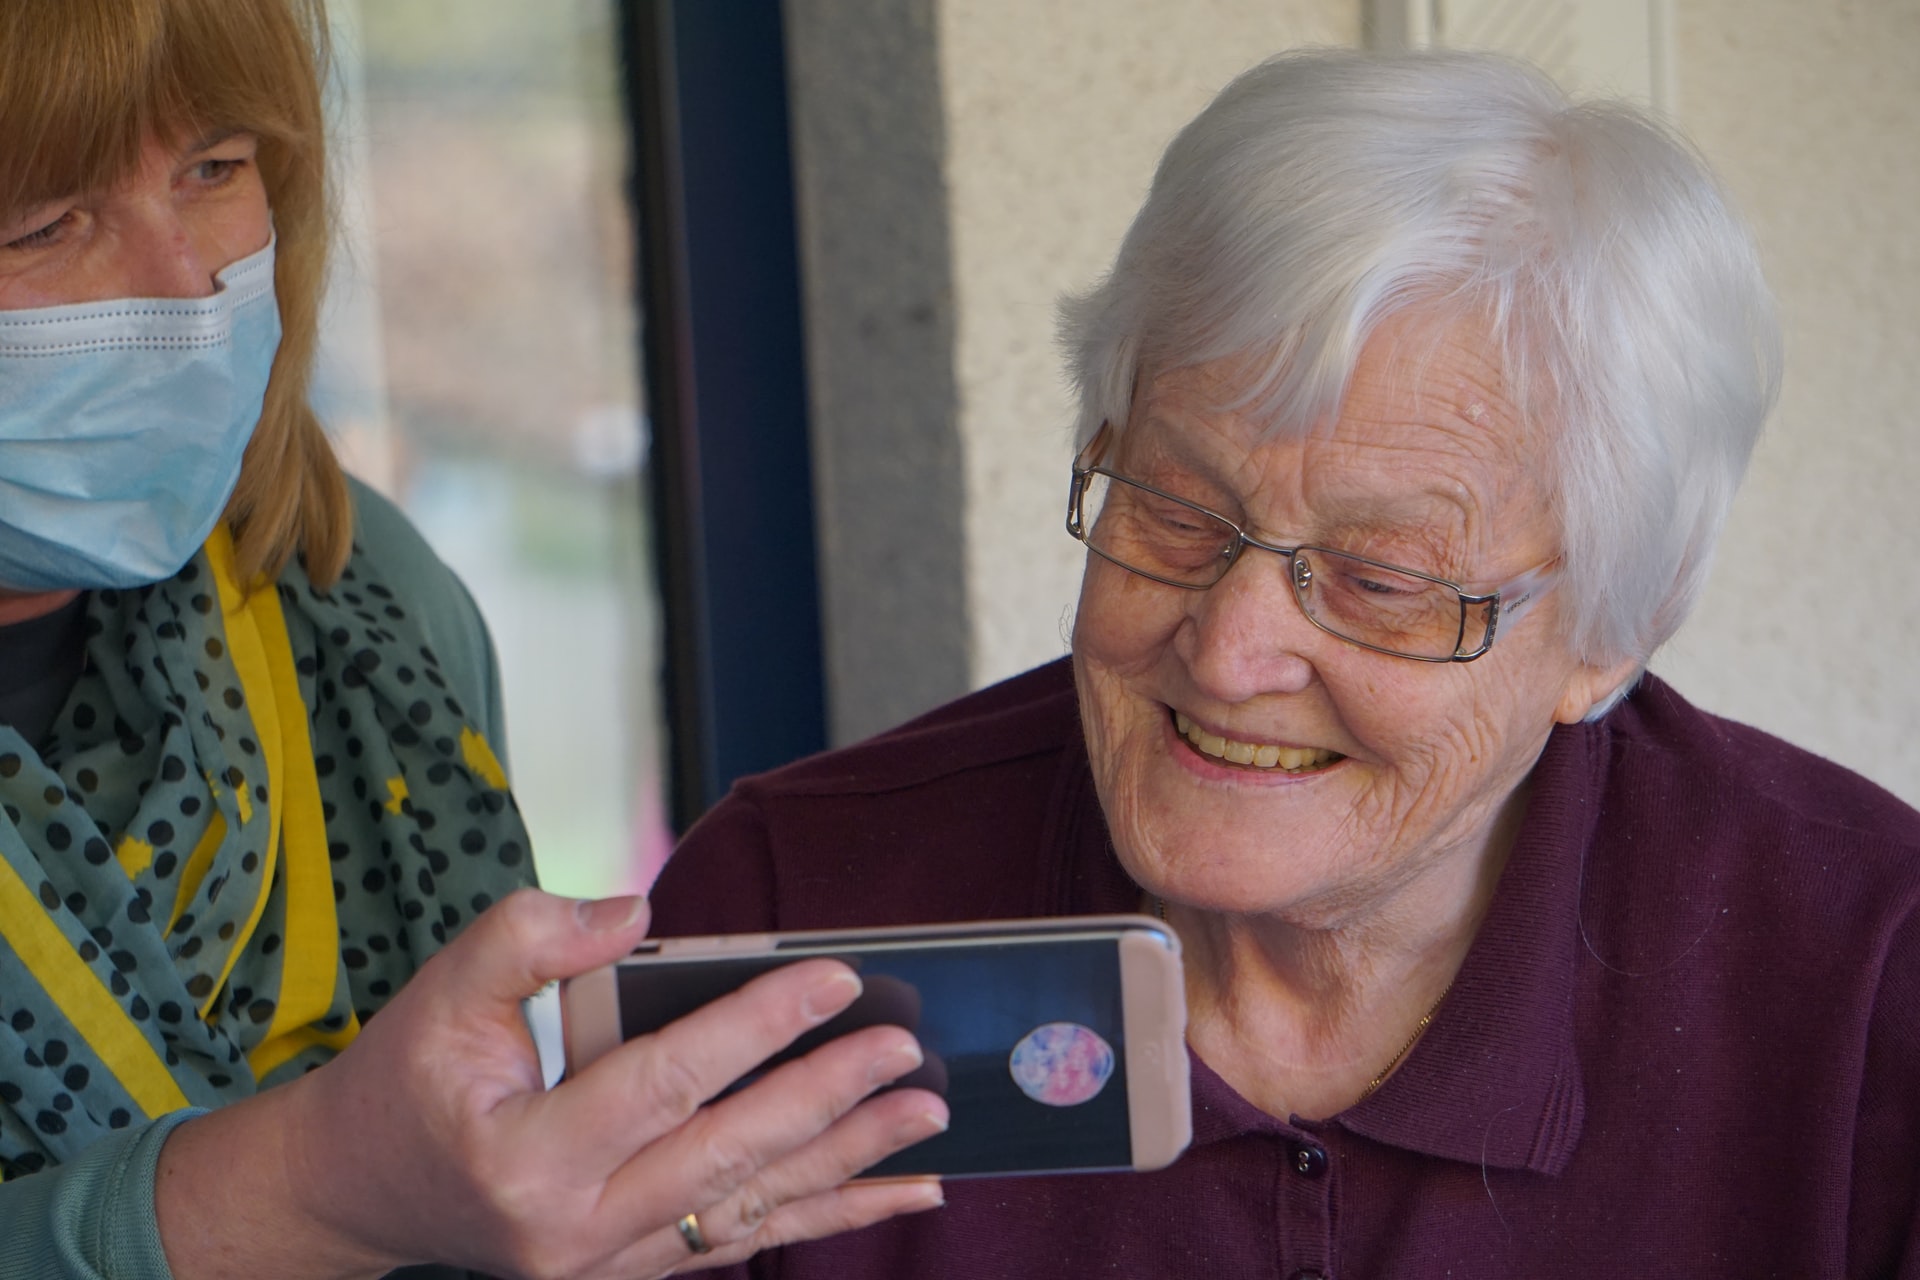 A smiling elderly woman wearing glasses is looking at a smartphone screen.